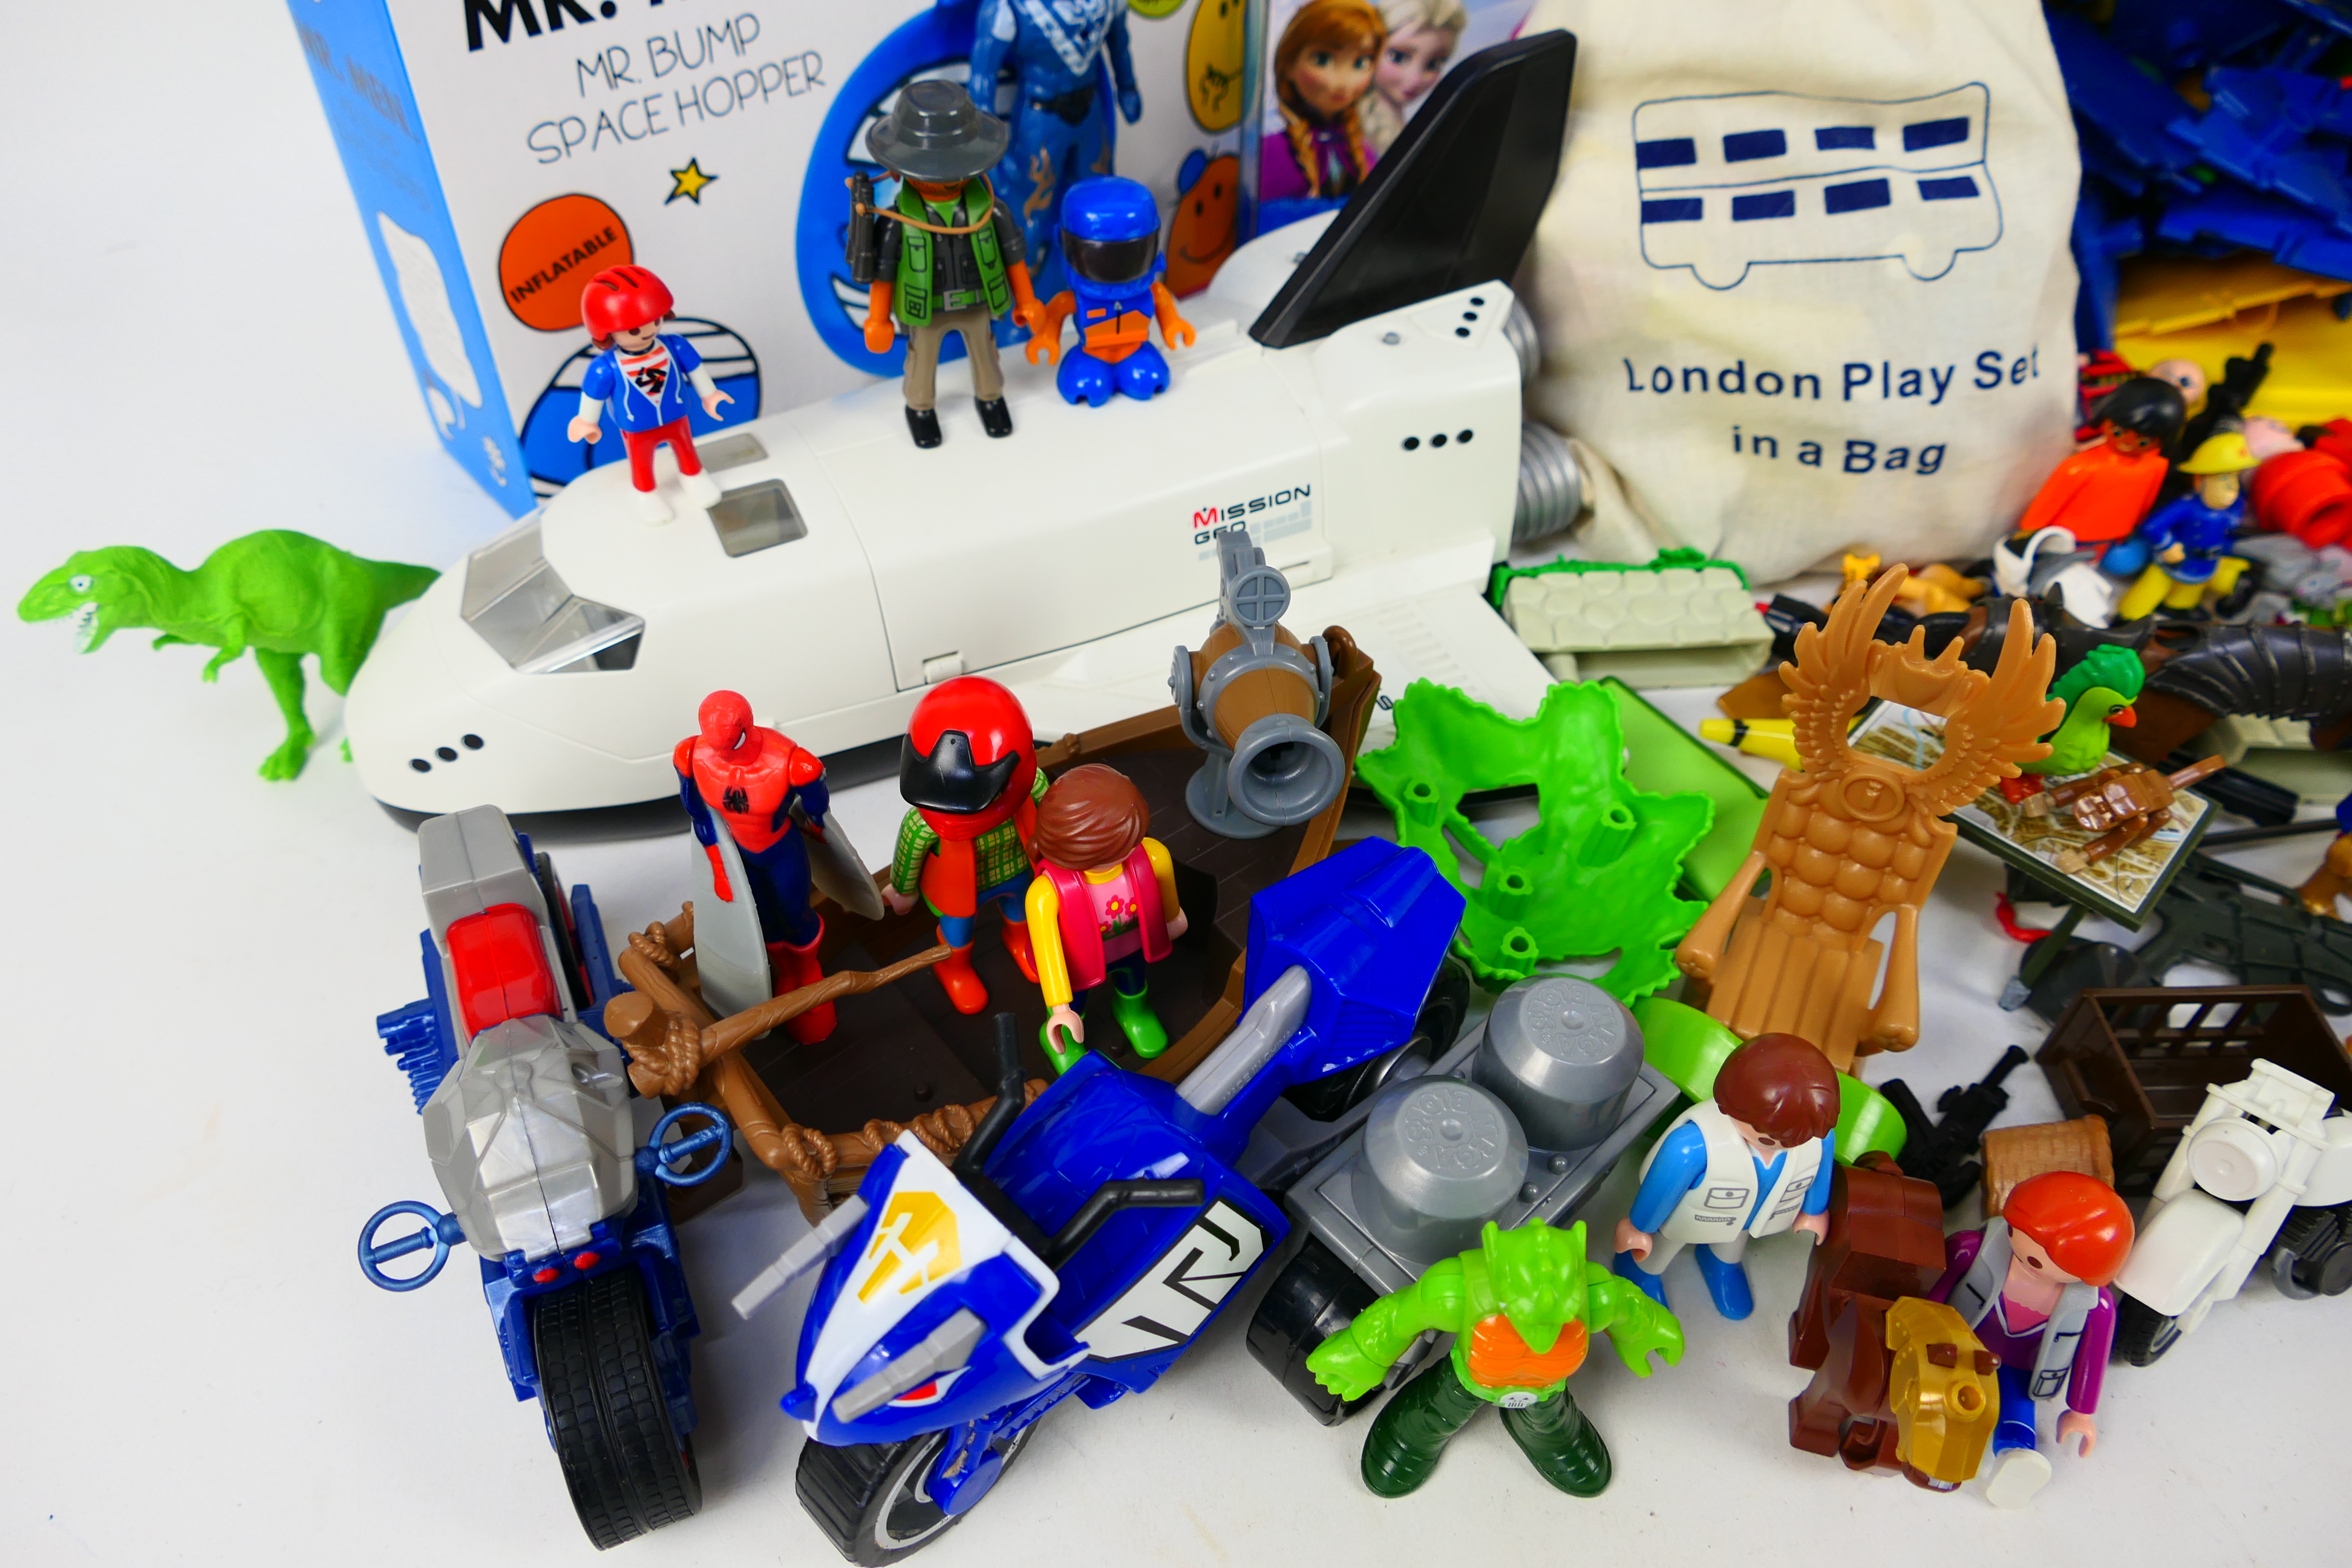 Mr Men - Frozen - Polydron - Playmobil - A collection of items including 3 x boxed space hoppers, - Image 3 of 3